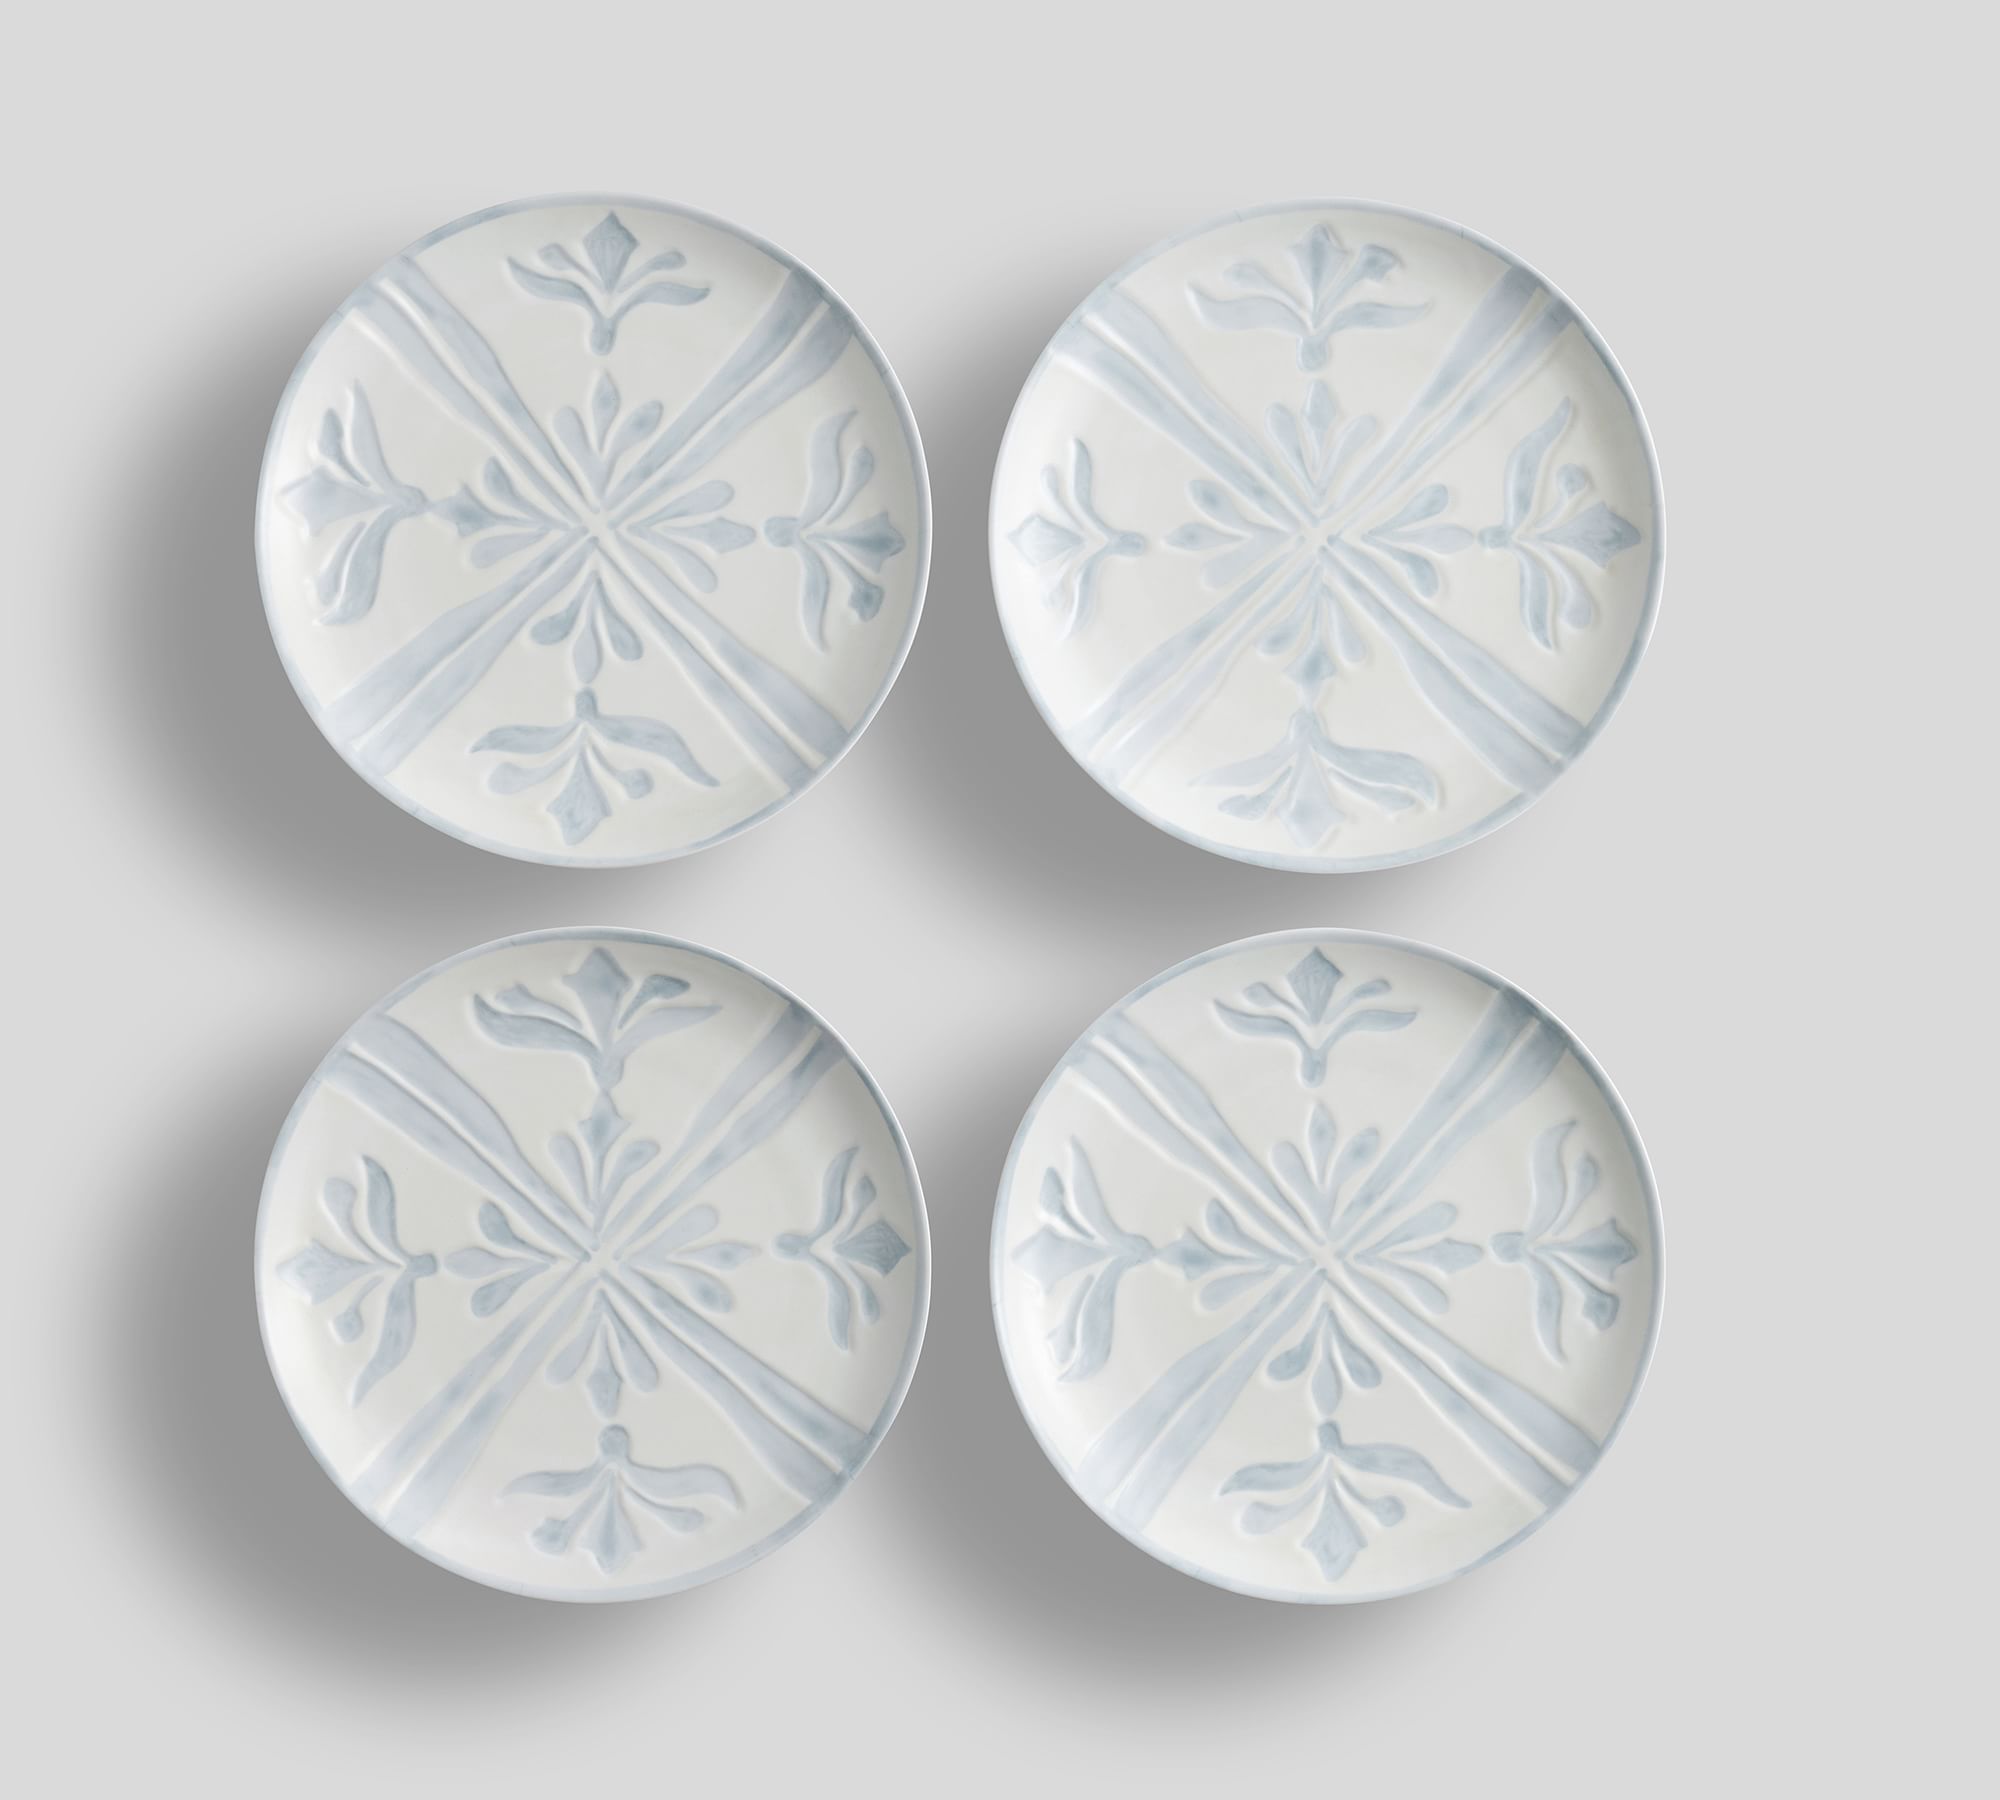 Chambray Tile Outdoor Melamine Salad Plates - Set of 4